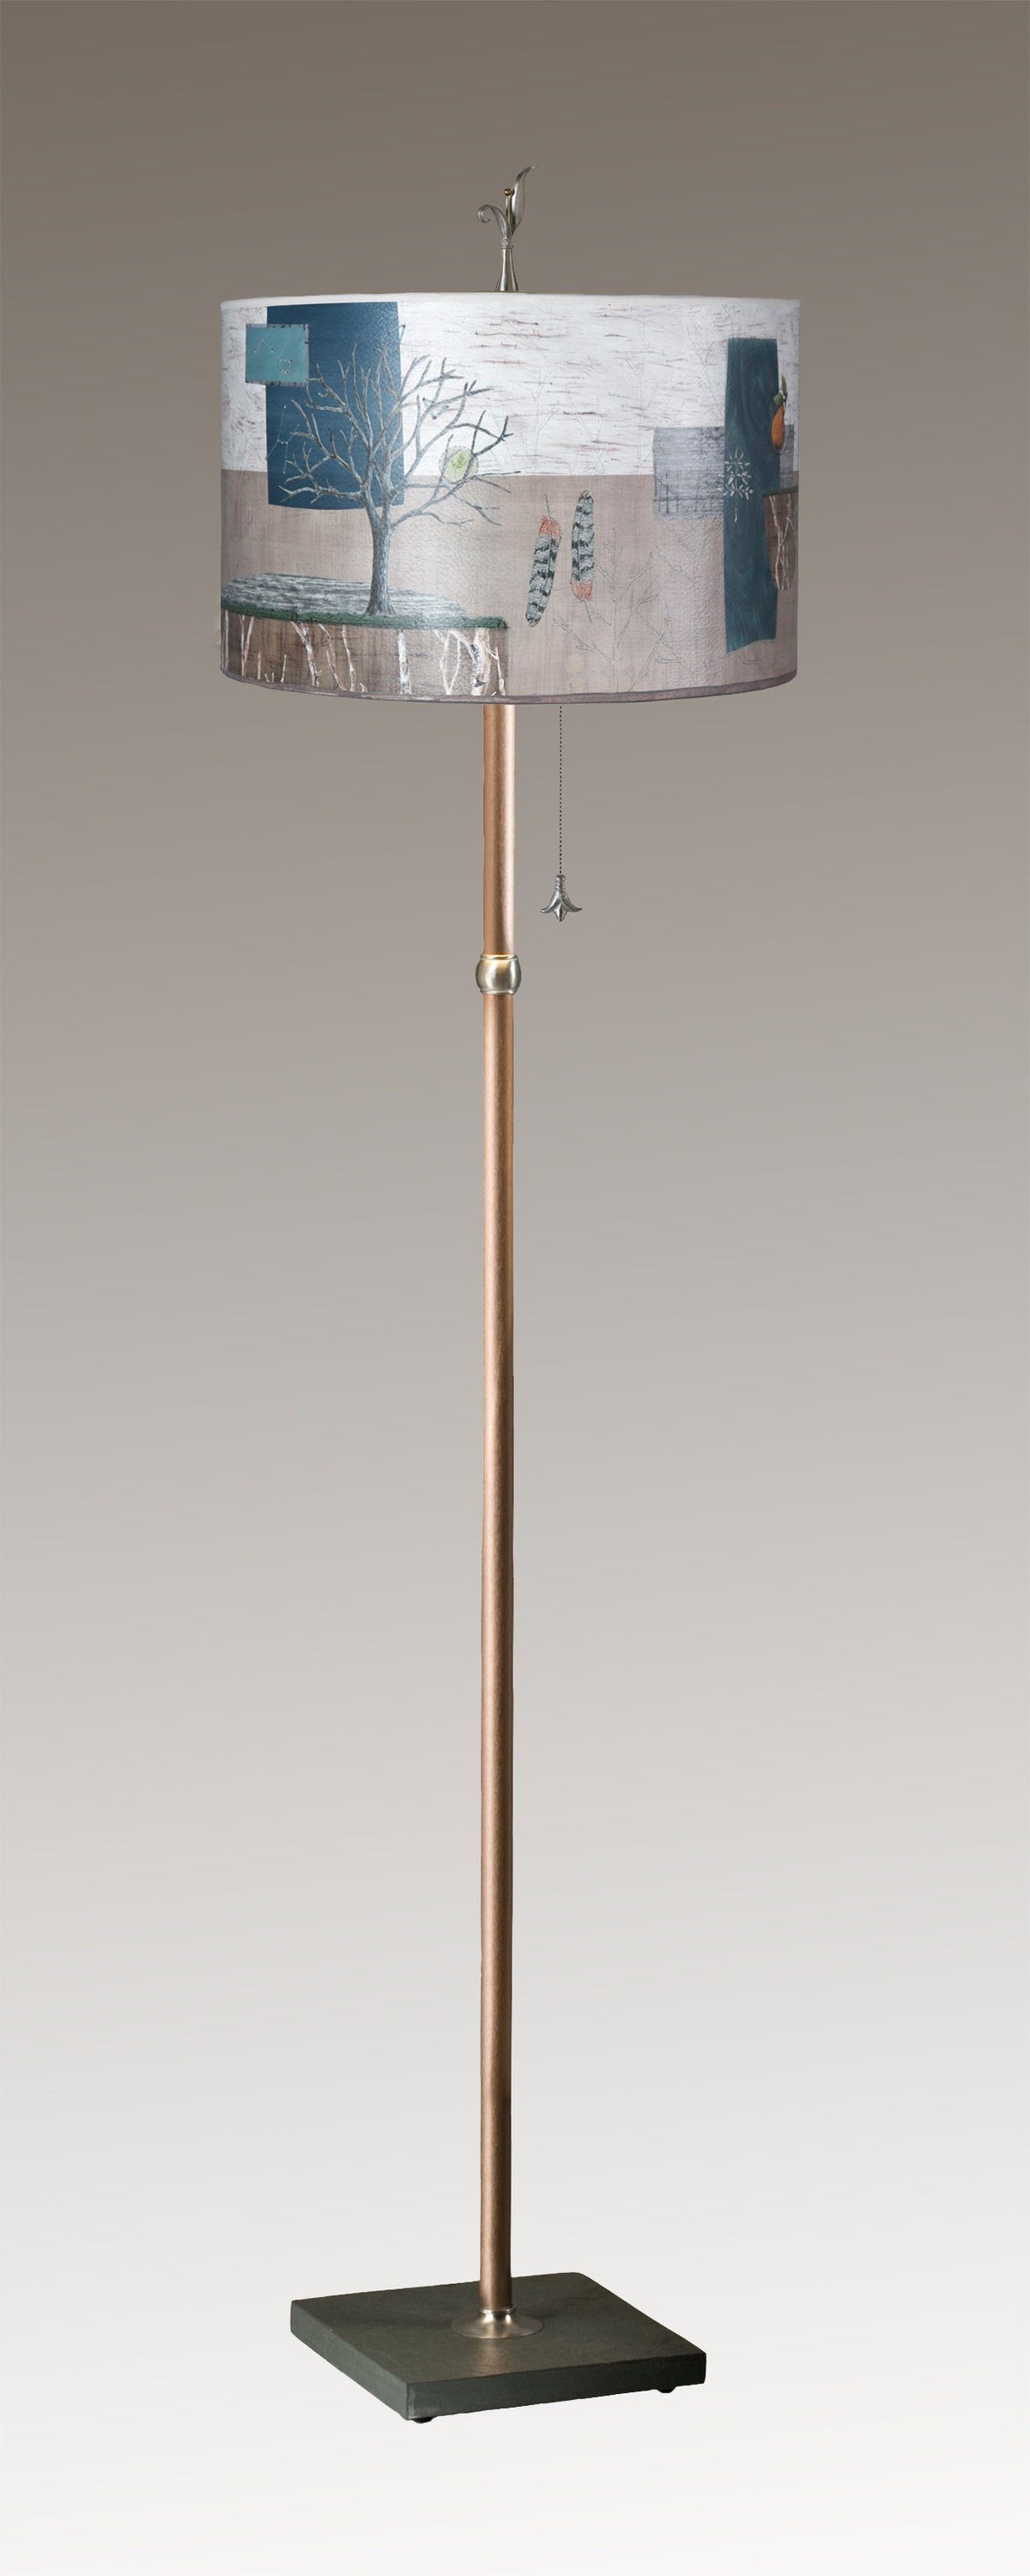 Janna Ugone &amp; Co Floor Lamps Copper Floor Lamp with Large Drum Shade in Wander in Drift